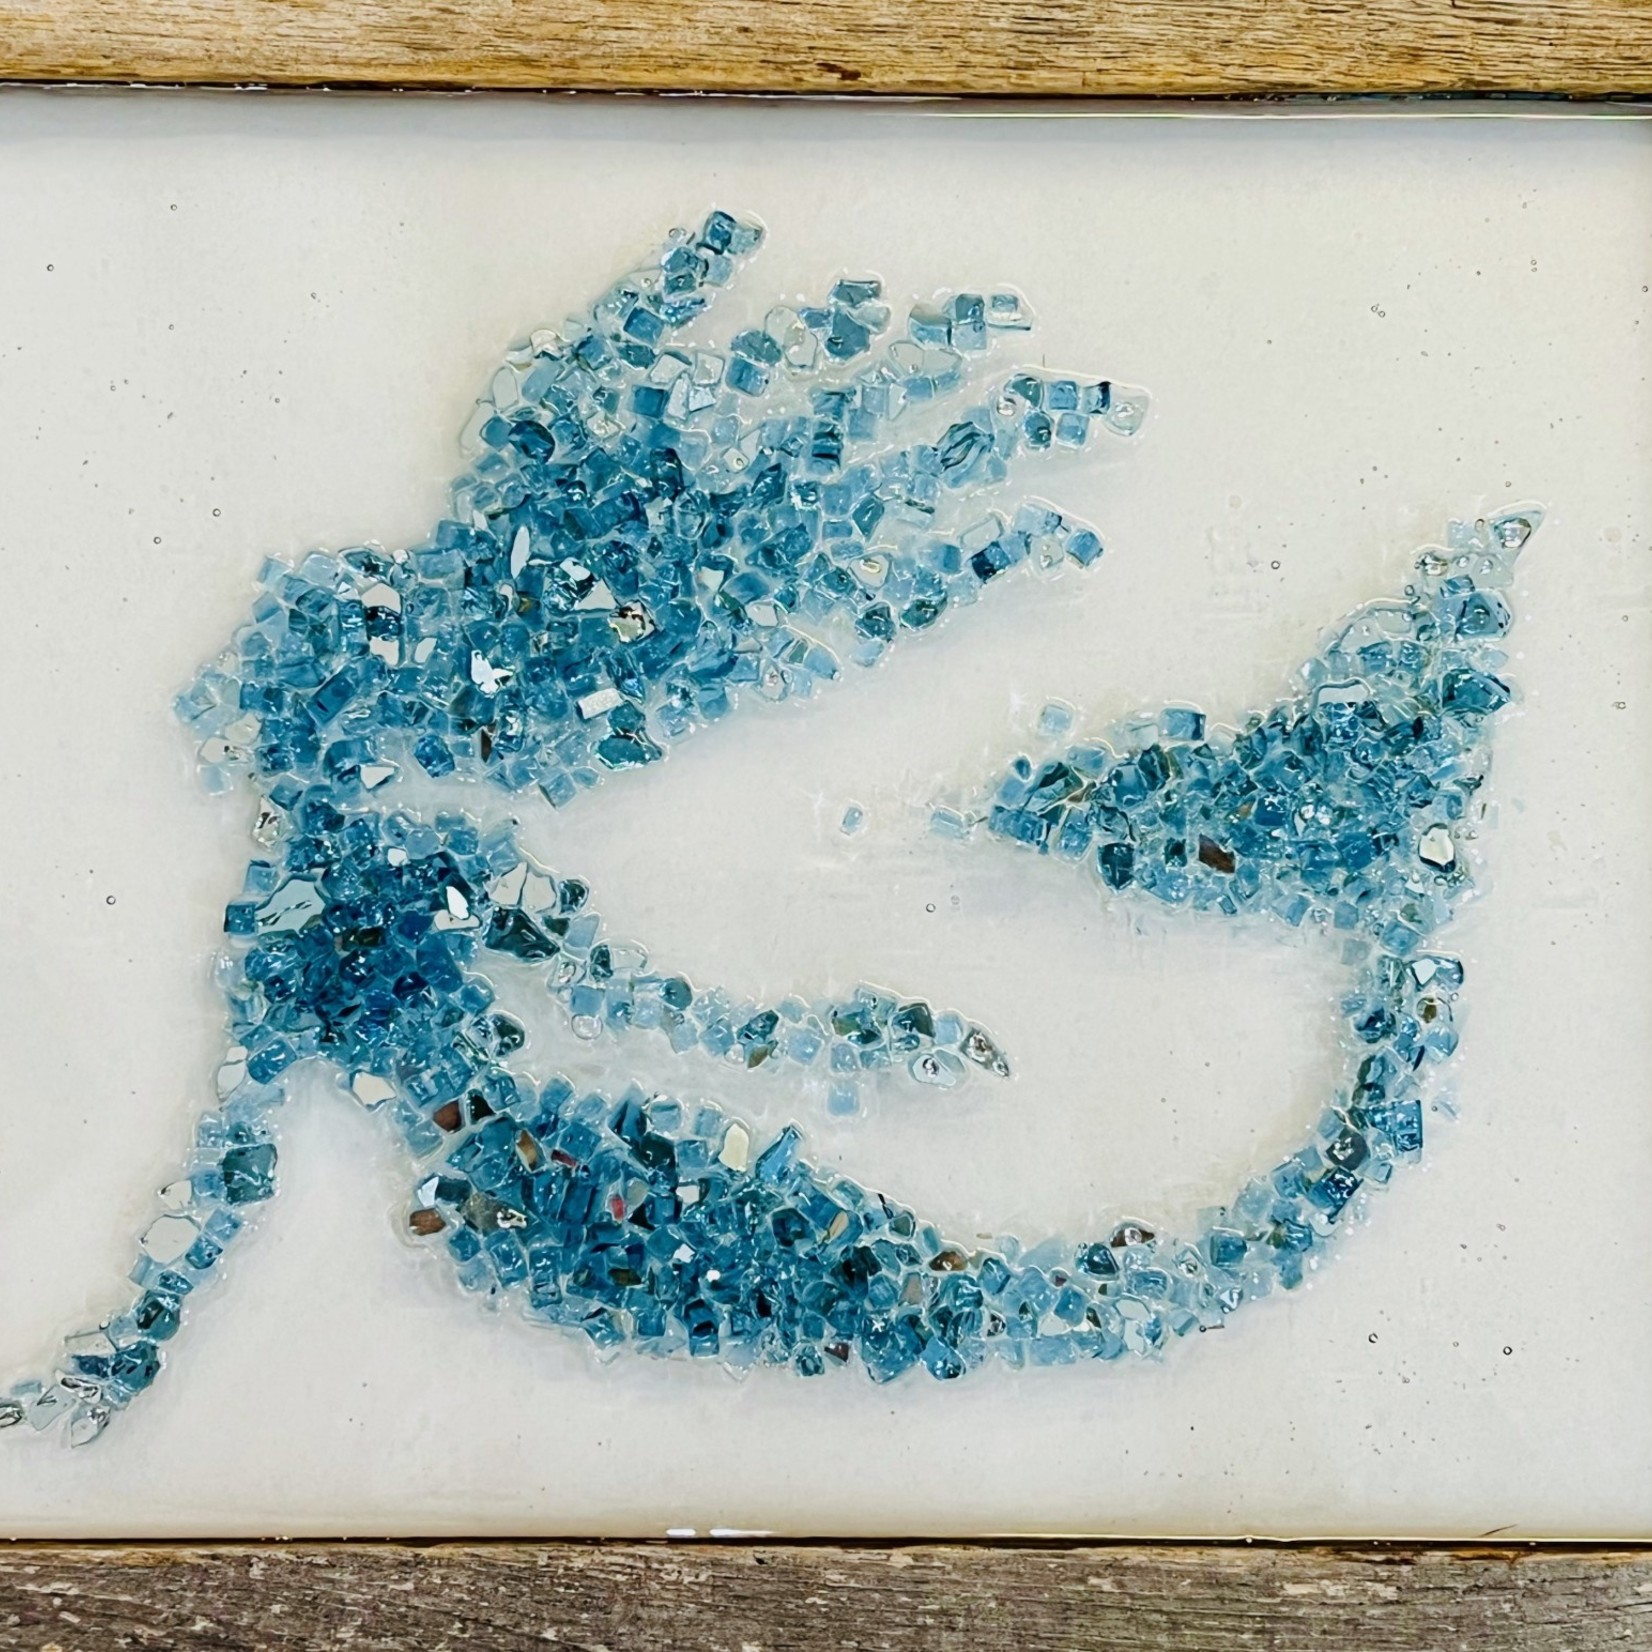 Sue by the Seashore Mermaid, blue, crushed glass, framed,17x13", SUES